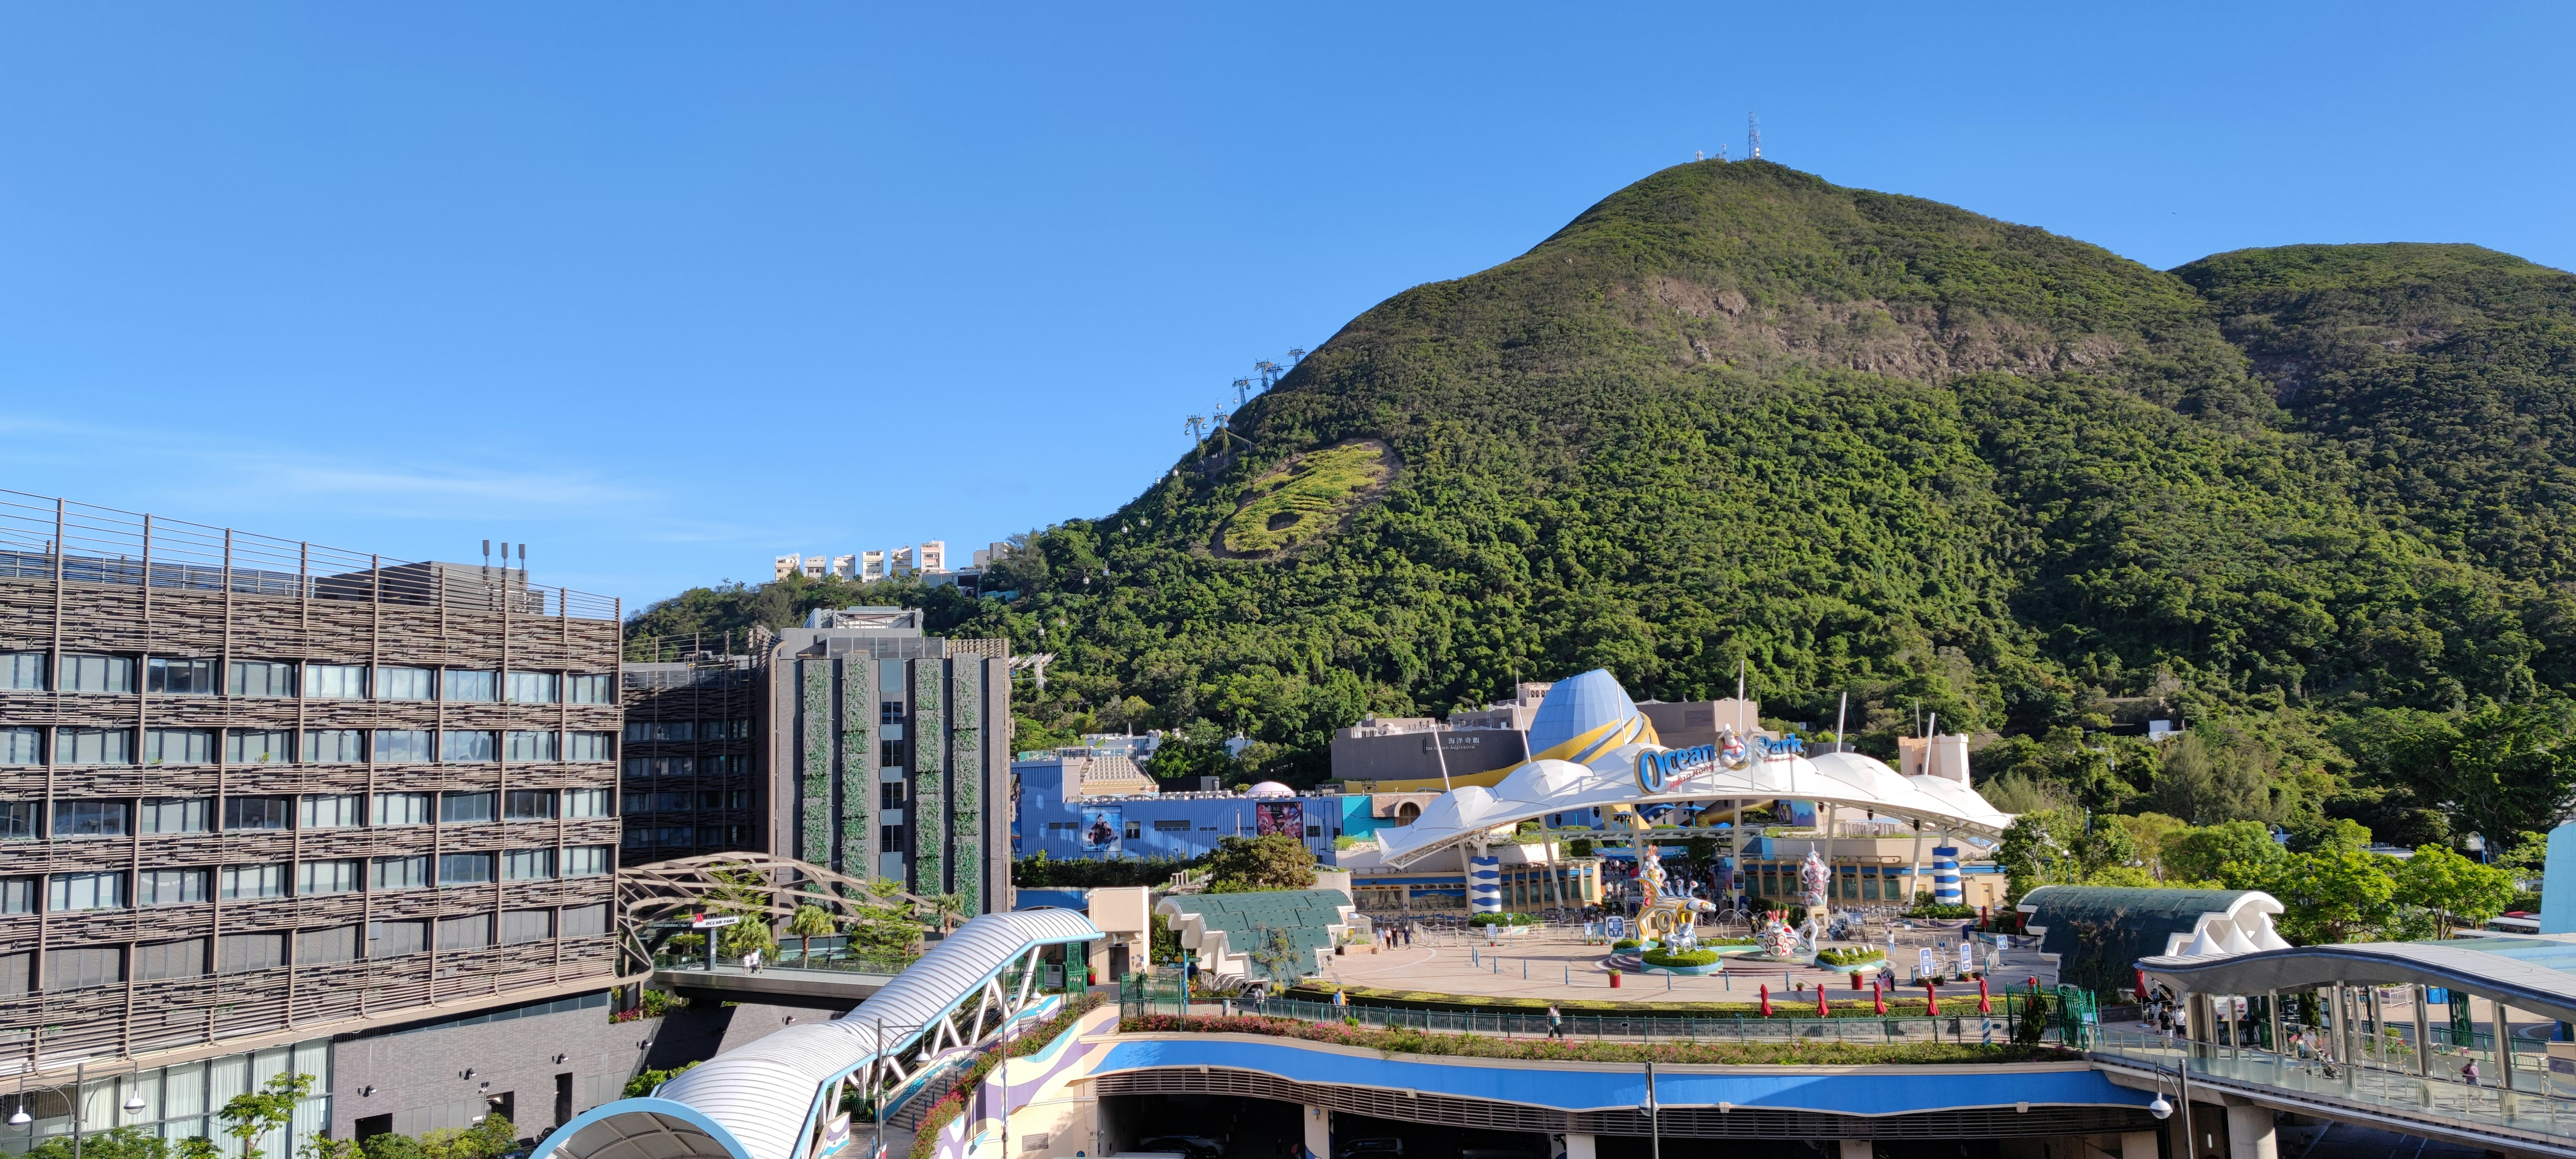 The entrance of Ocean Park, a tourist attraction and amusement park, in Wong Chuk Hang, southern district of Hong Kong Island. On the left is Hong Kong Ocean Park Marriott Hotel. The iconic sea horse symbol of Ocean Park is seen on the hill slope. Cable cars are running.